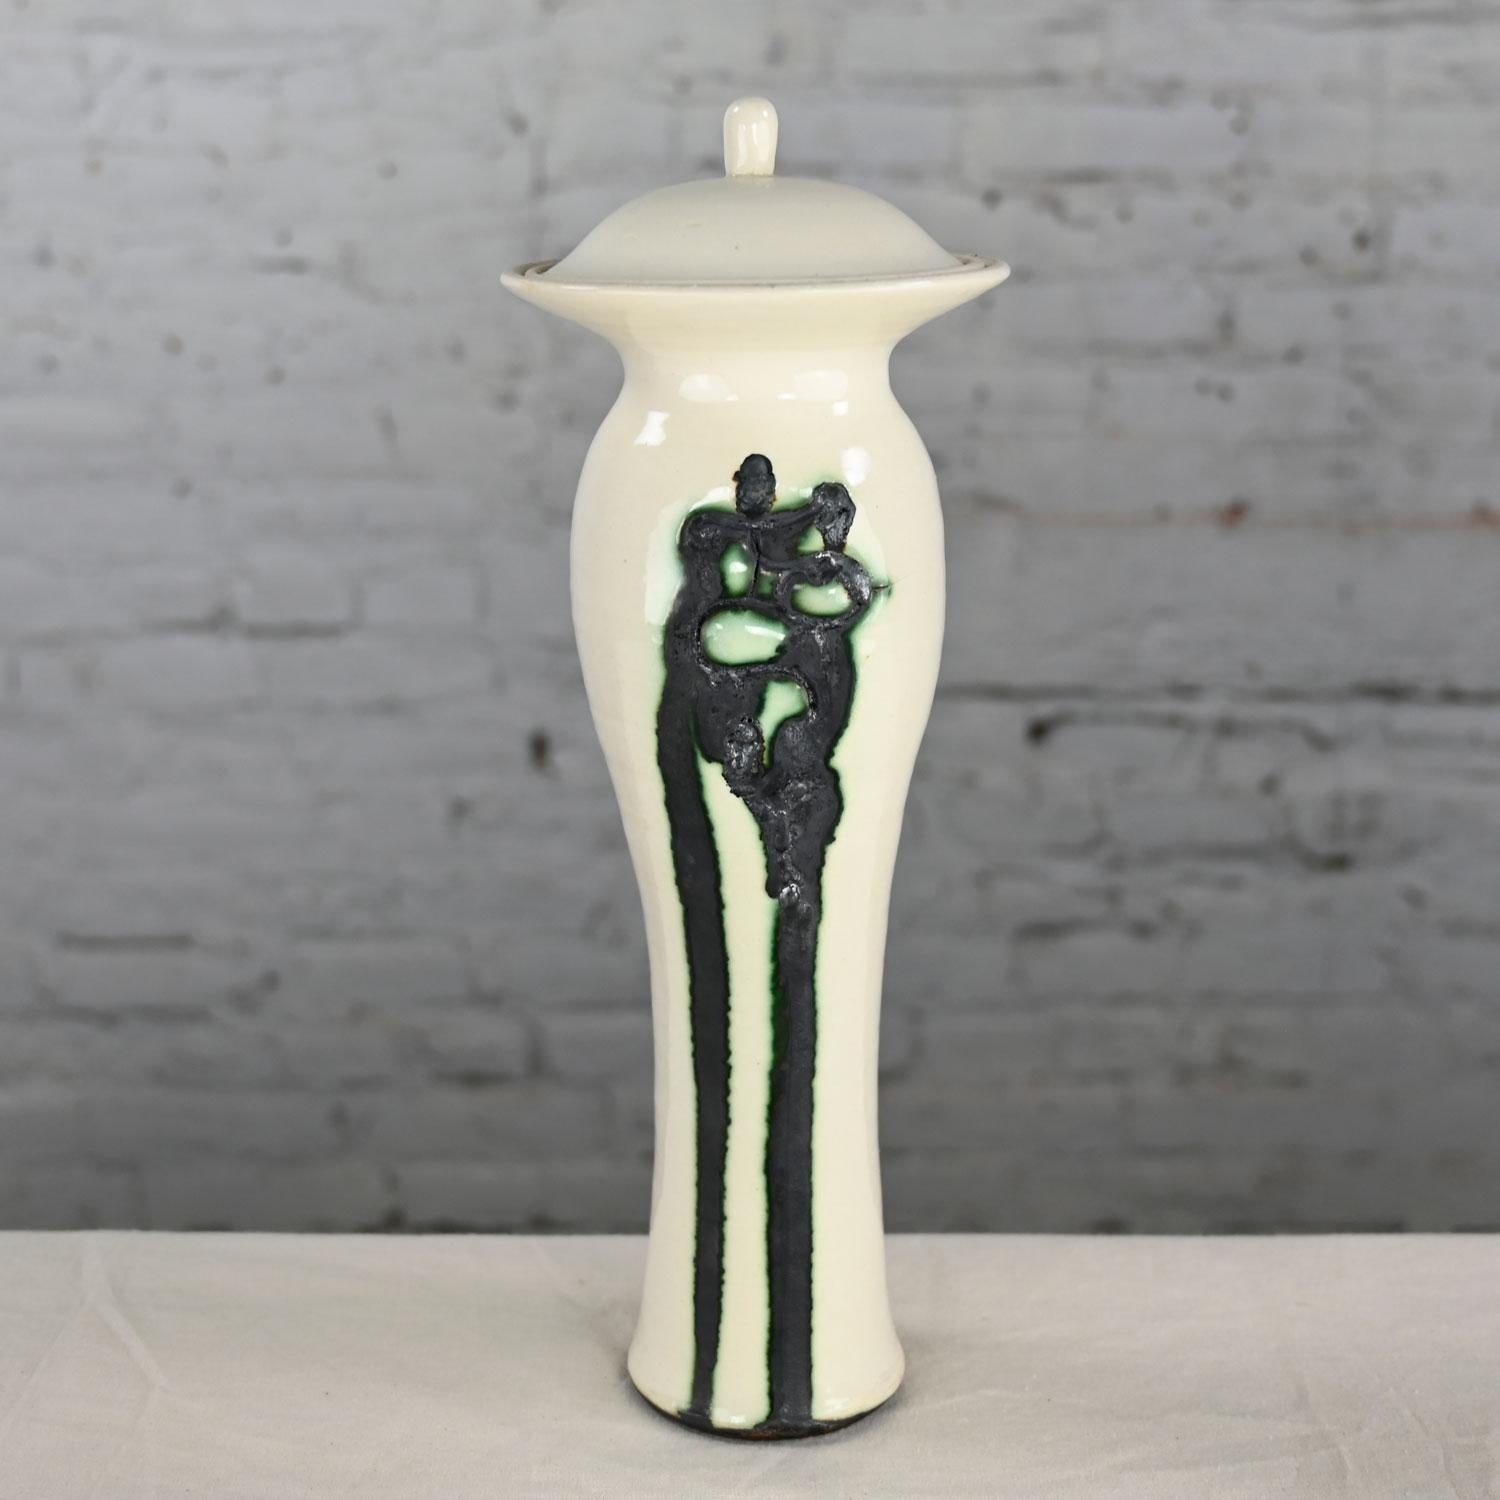 Unknown White & Black W/Green Accent Ceramic Lidded Vessel Signed Pritchard Spring 75 For Sale